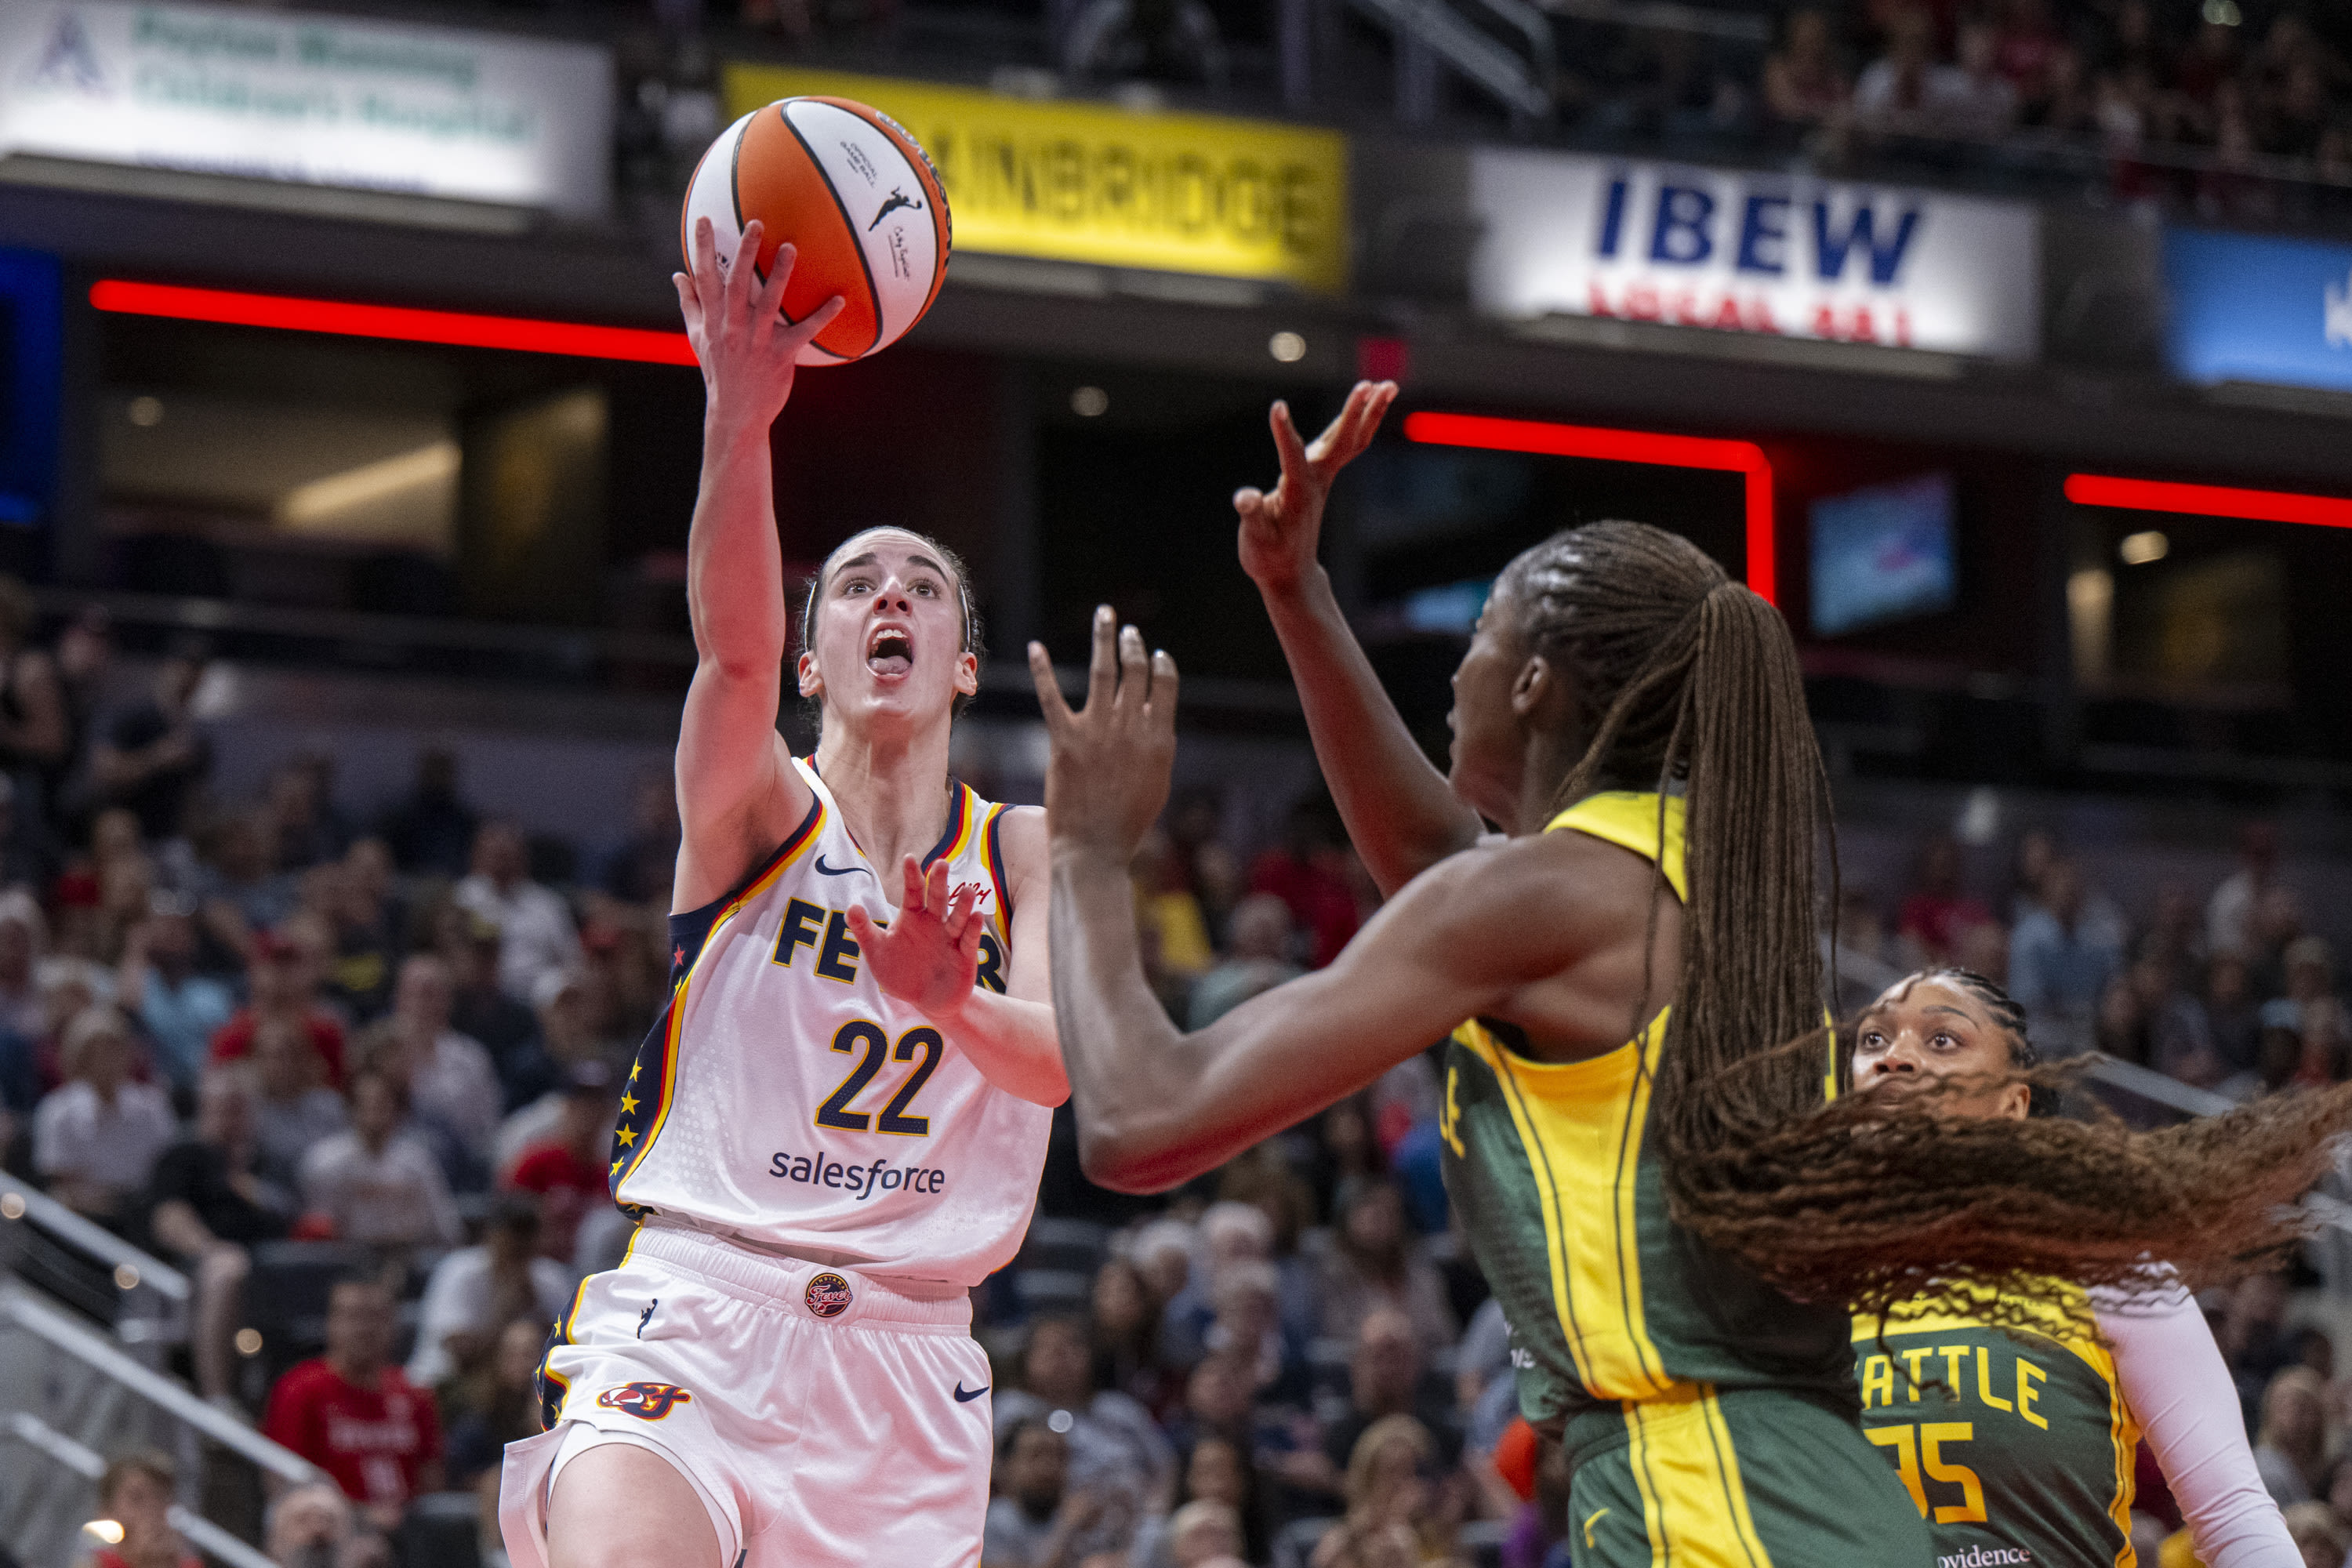 Clark plays the full 40 for 20 points, but Loyd gets 22 to lead Storm over Fever 103-88